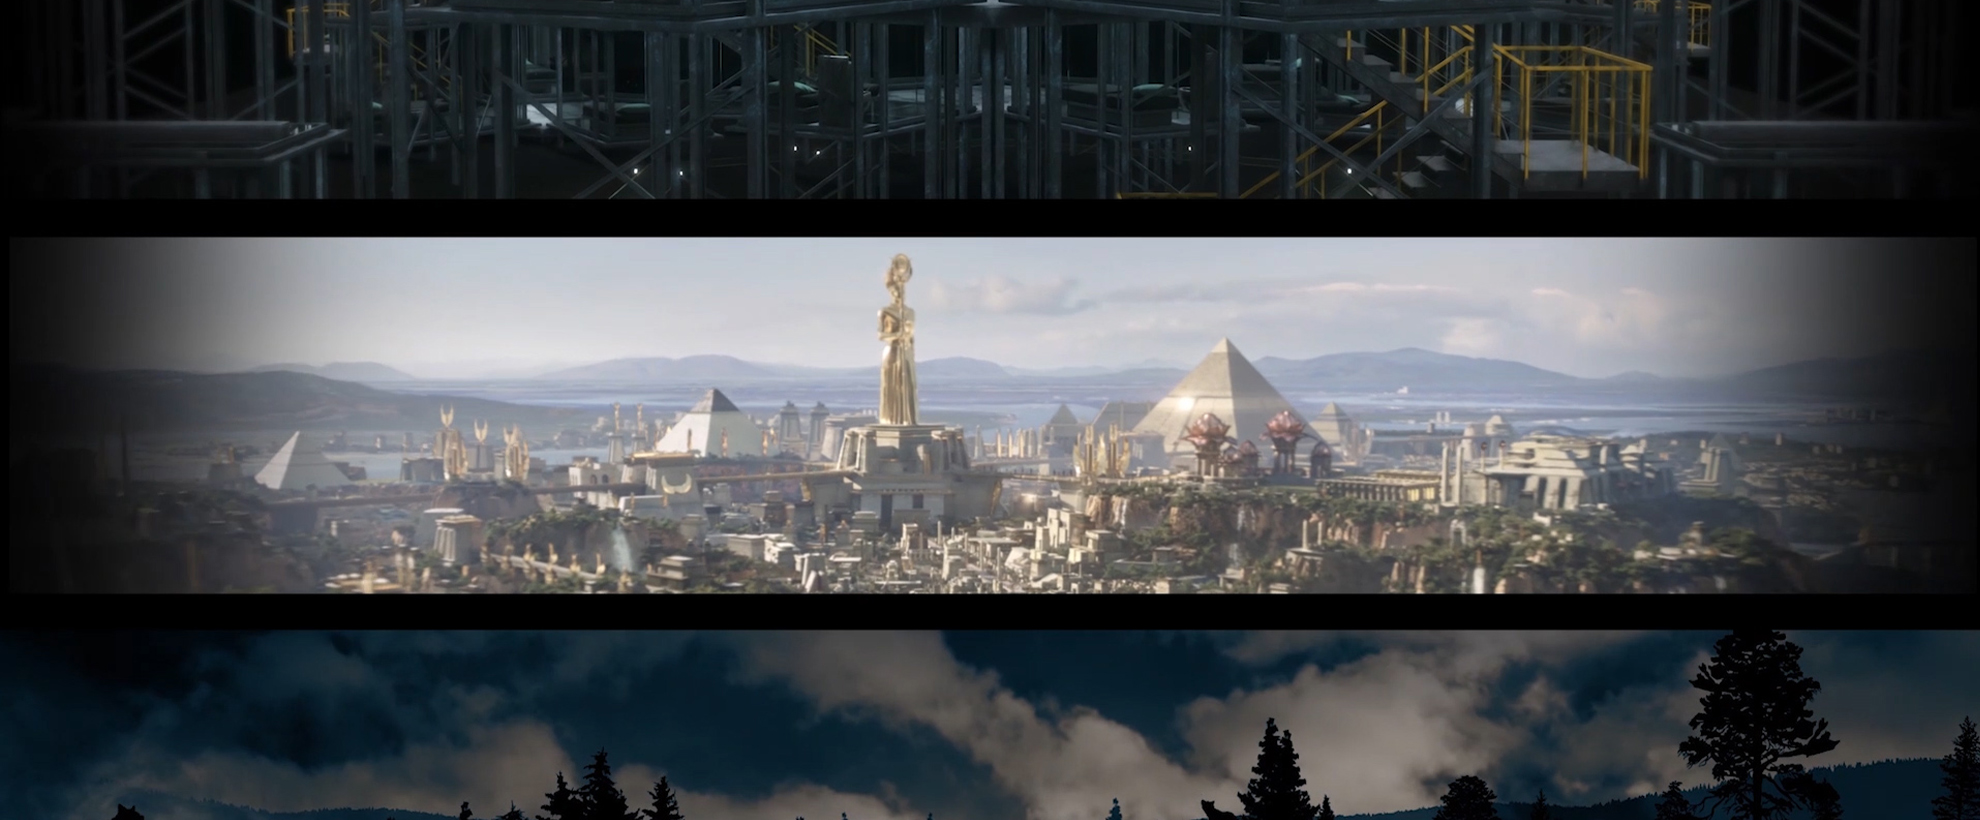 A split of three images, the top being a industrial warehouse with pipes and ladders. The middle section is a futuristic city with golden pyramids and statues. The bottom shows a grey sky with the outline of trees in front.  